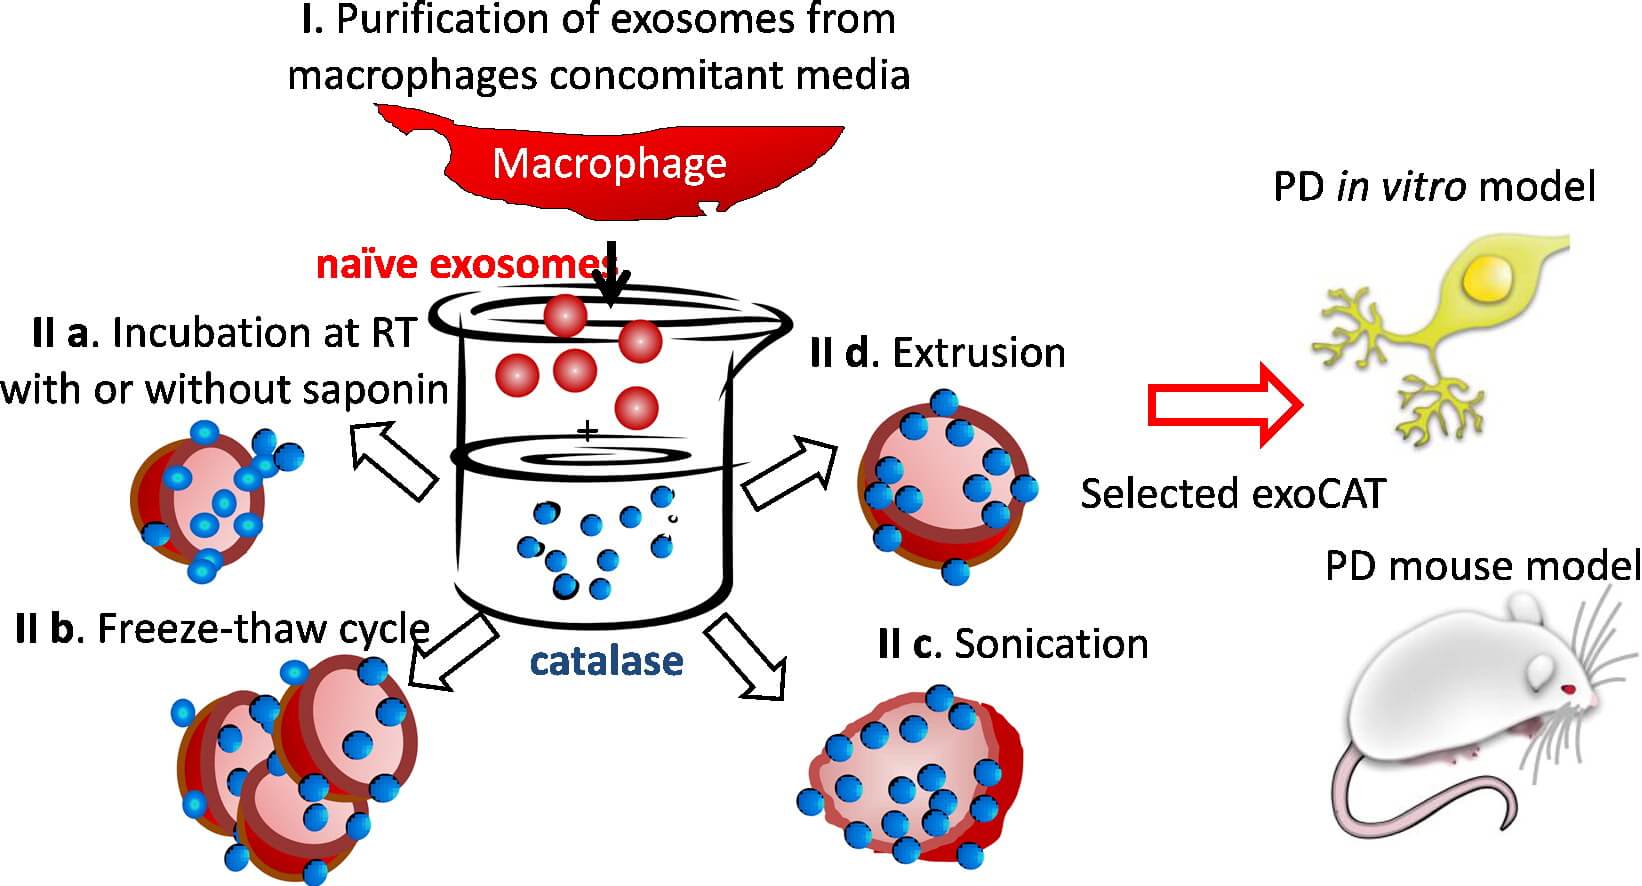 Exosomes as drug delivery vehicles for Parkinson’s disease therapy.